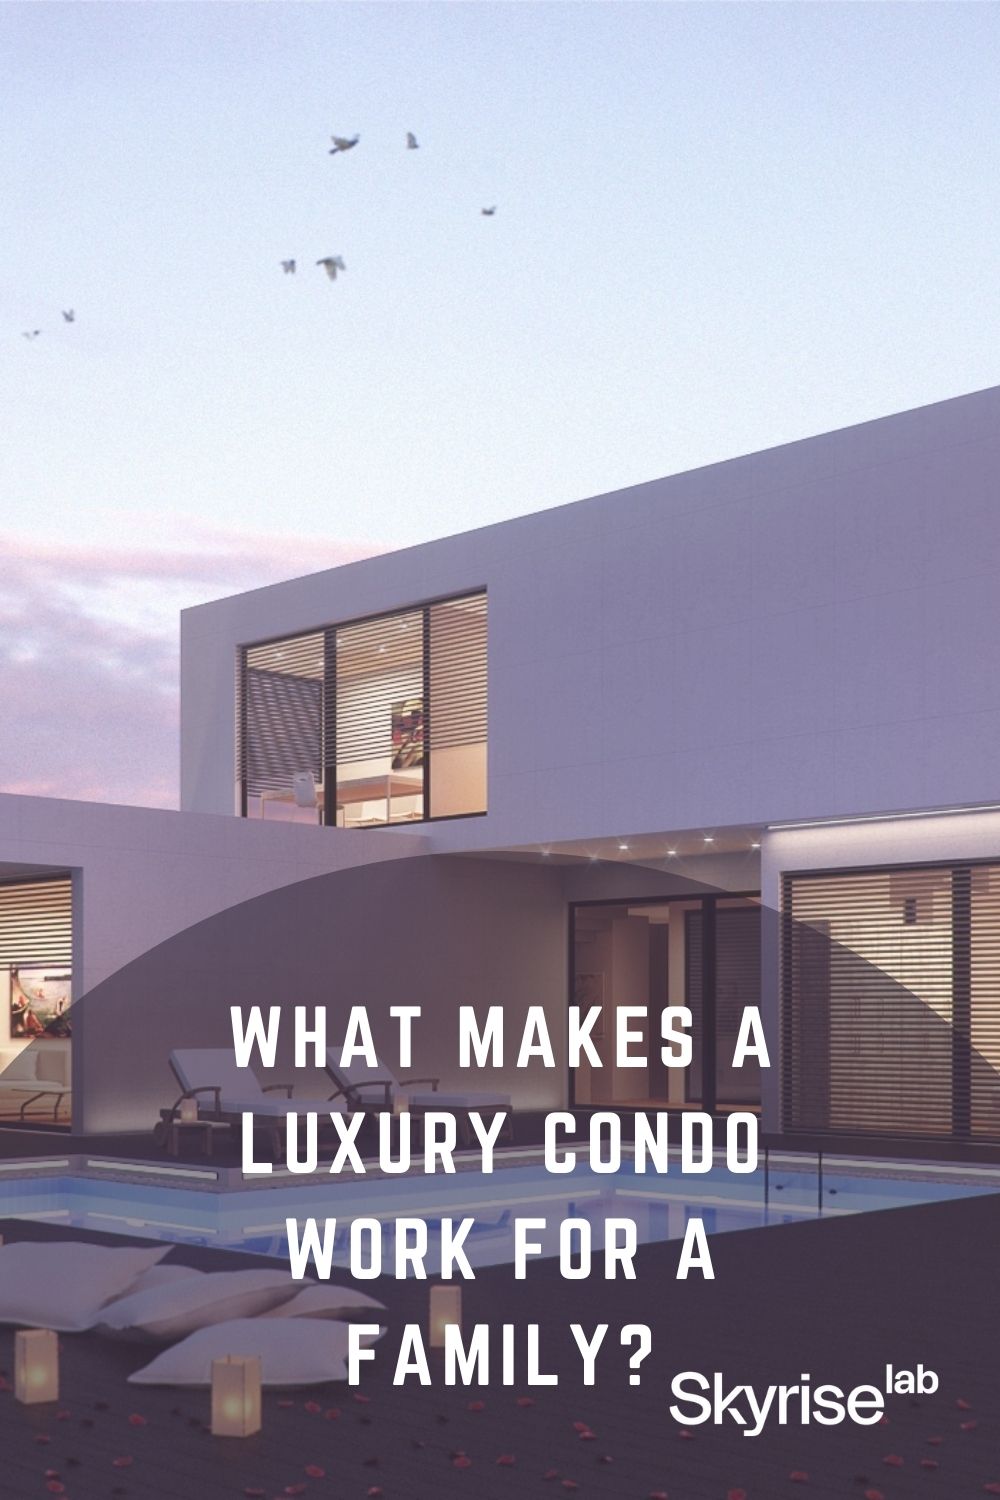 What Makes a Luxury Condo Work for a Family